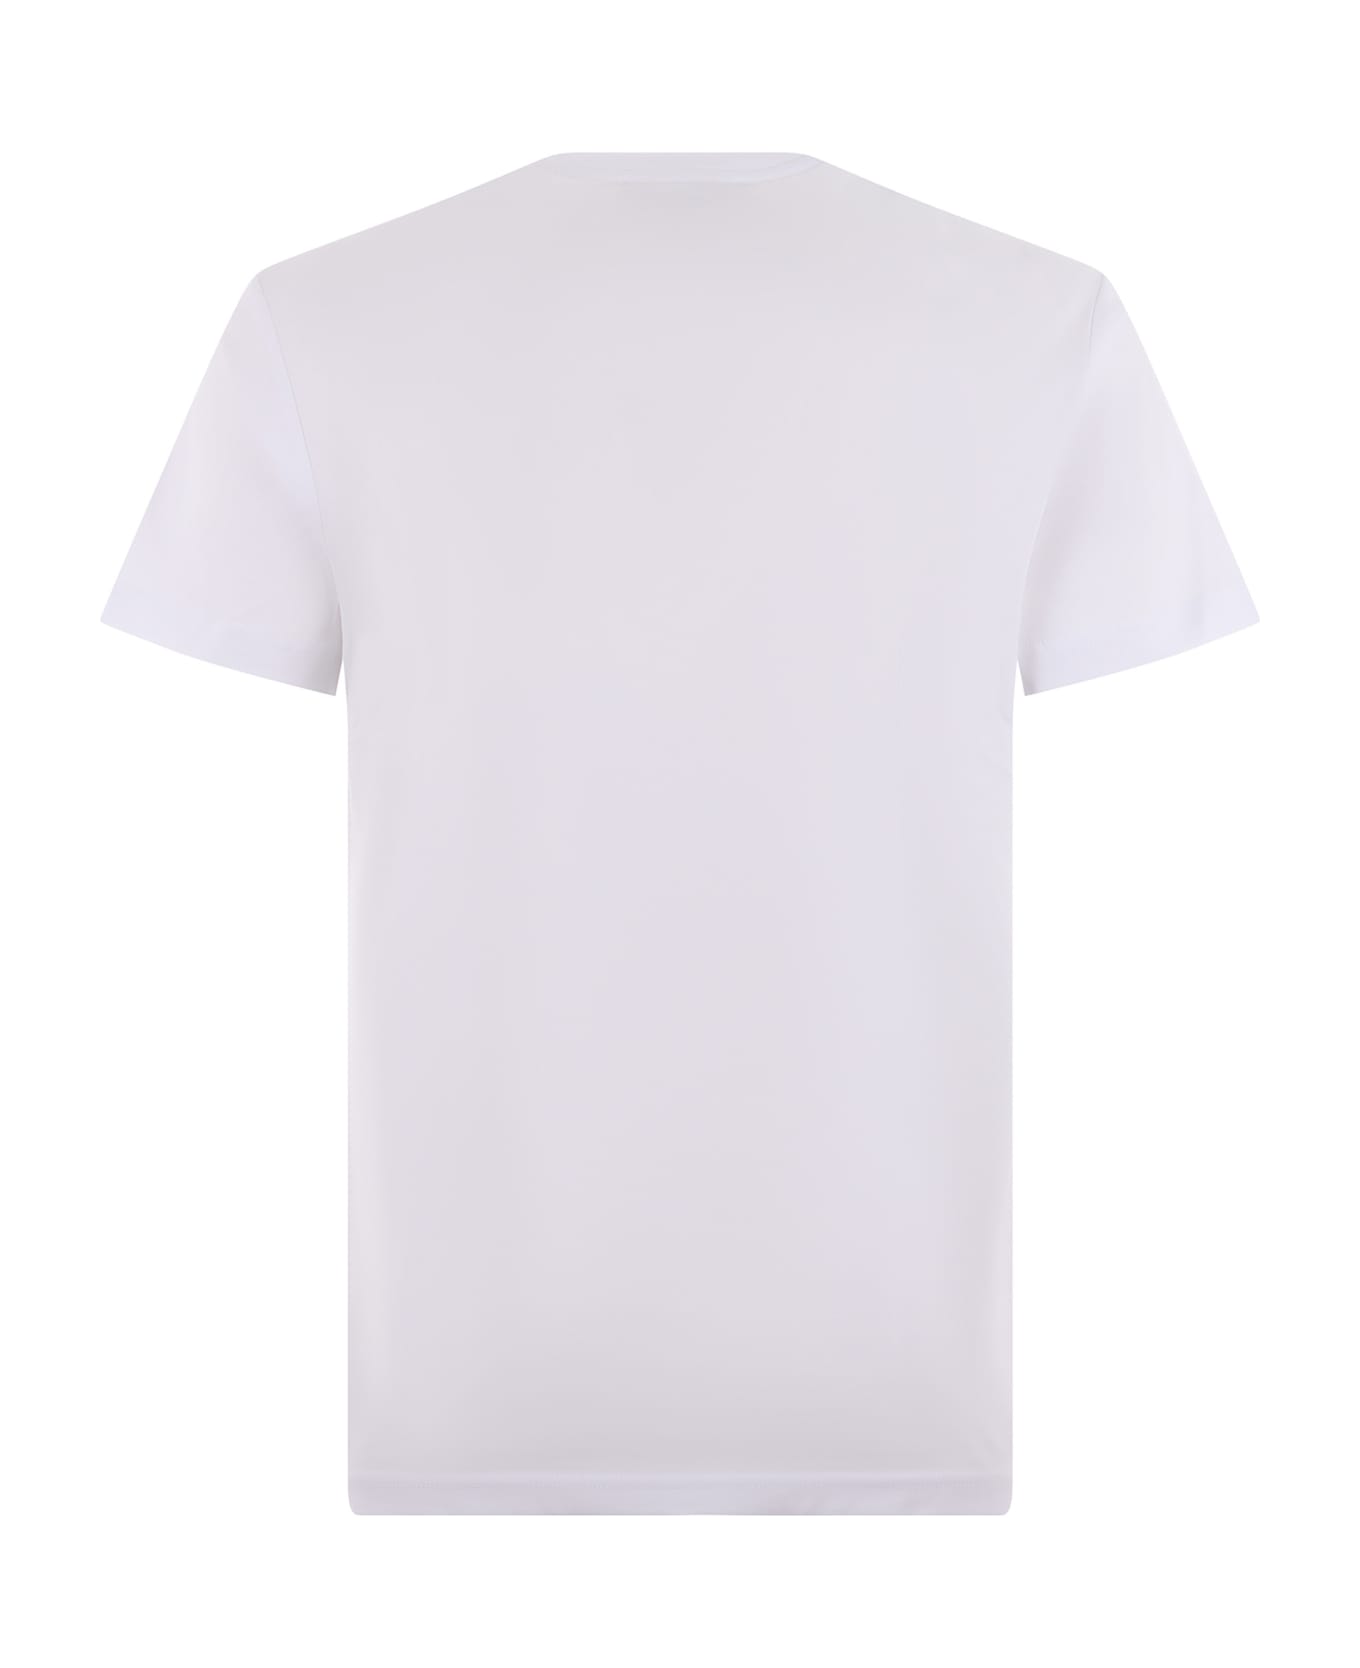 Versace Jeans Couture Printed T-shirt Versace Jeans Couture - Bianco/oro